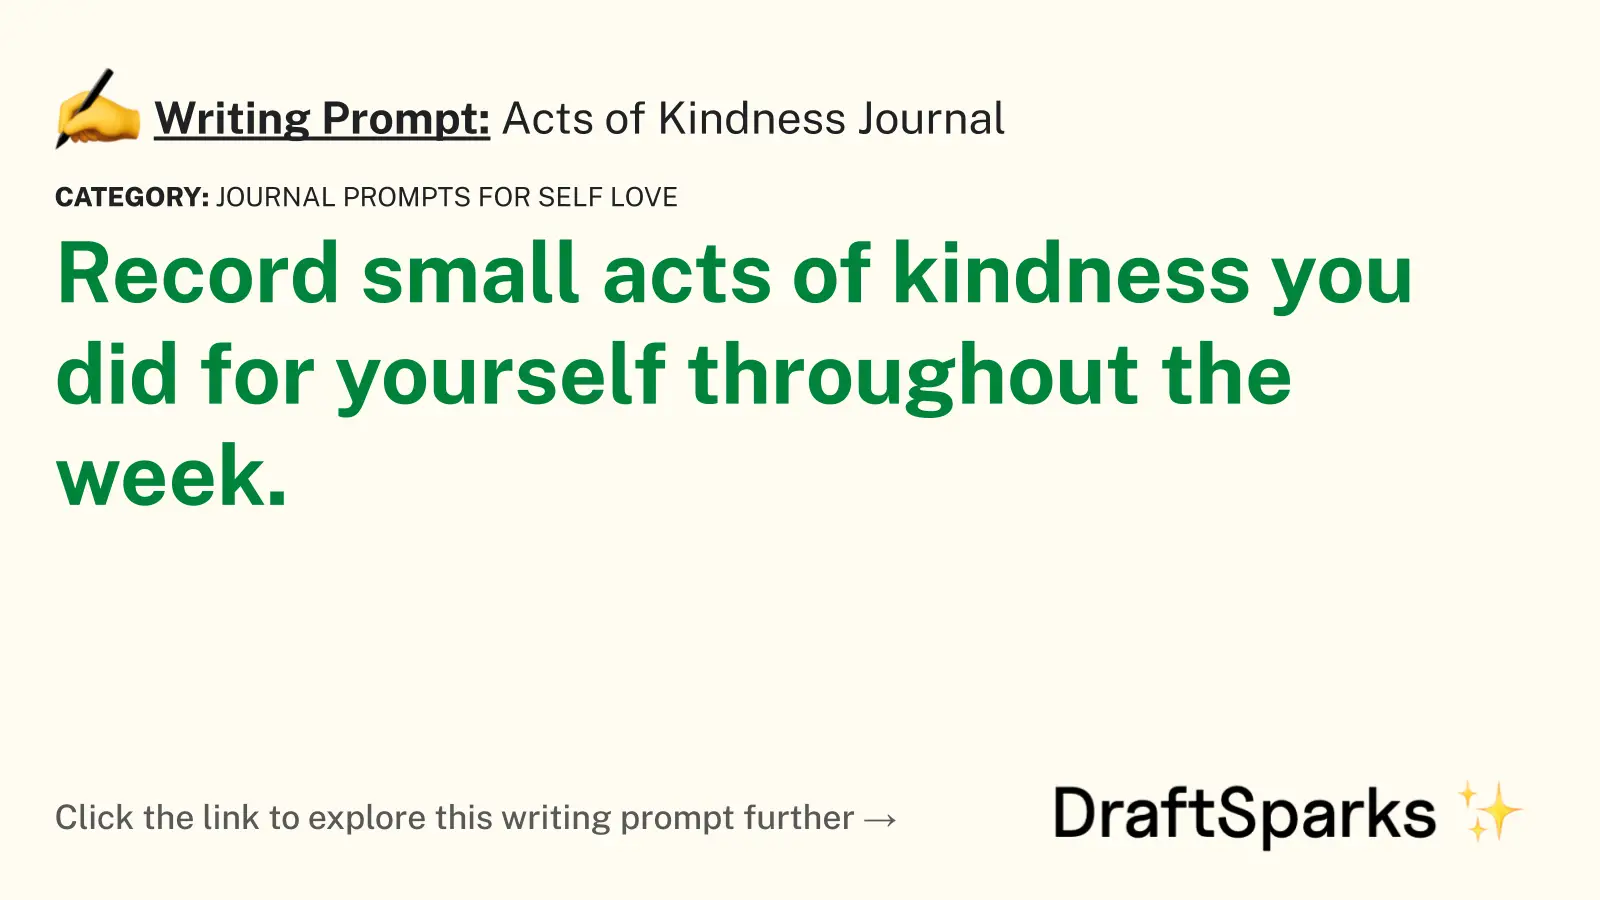 Acts of Kindness Journal